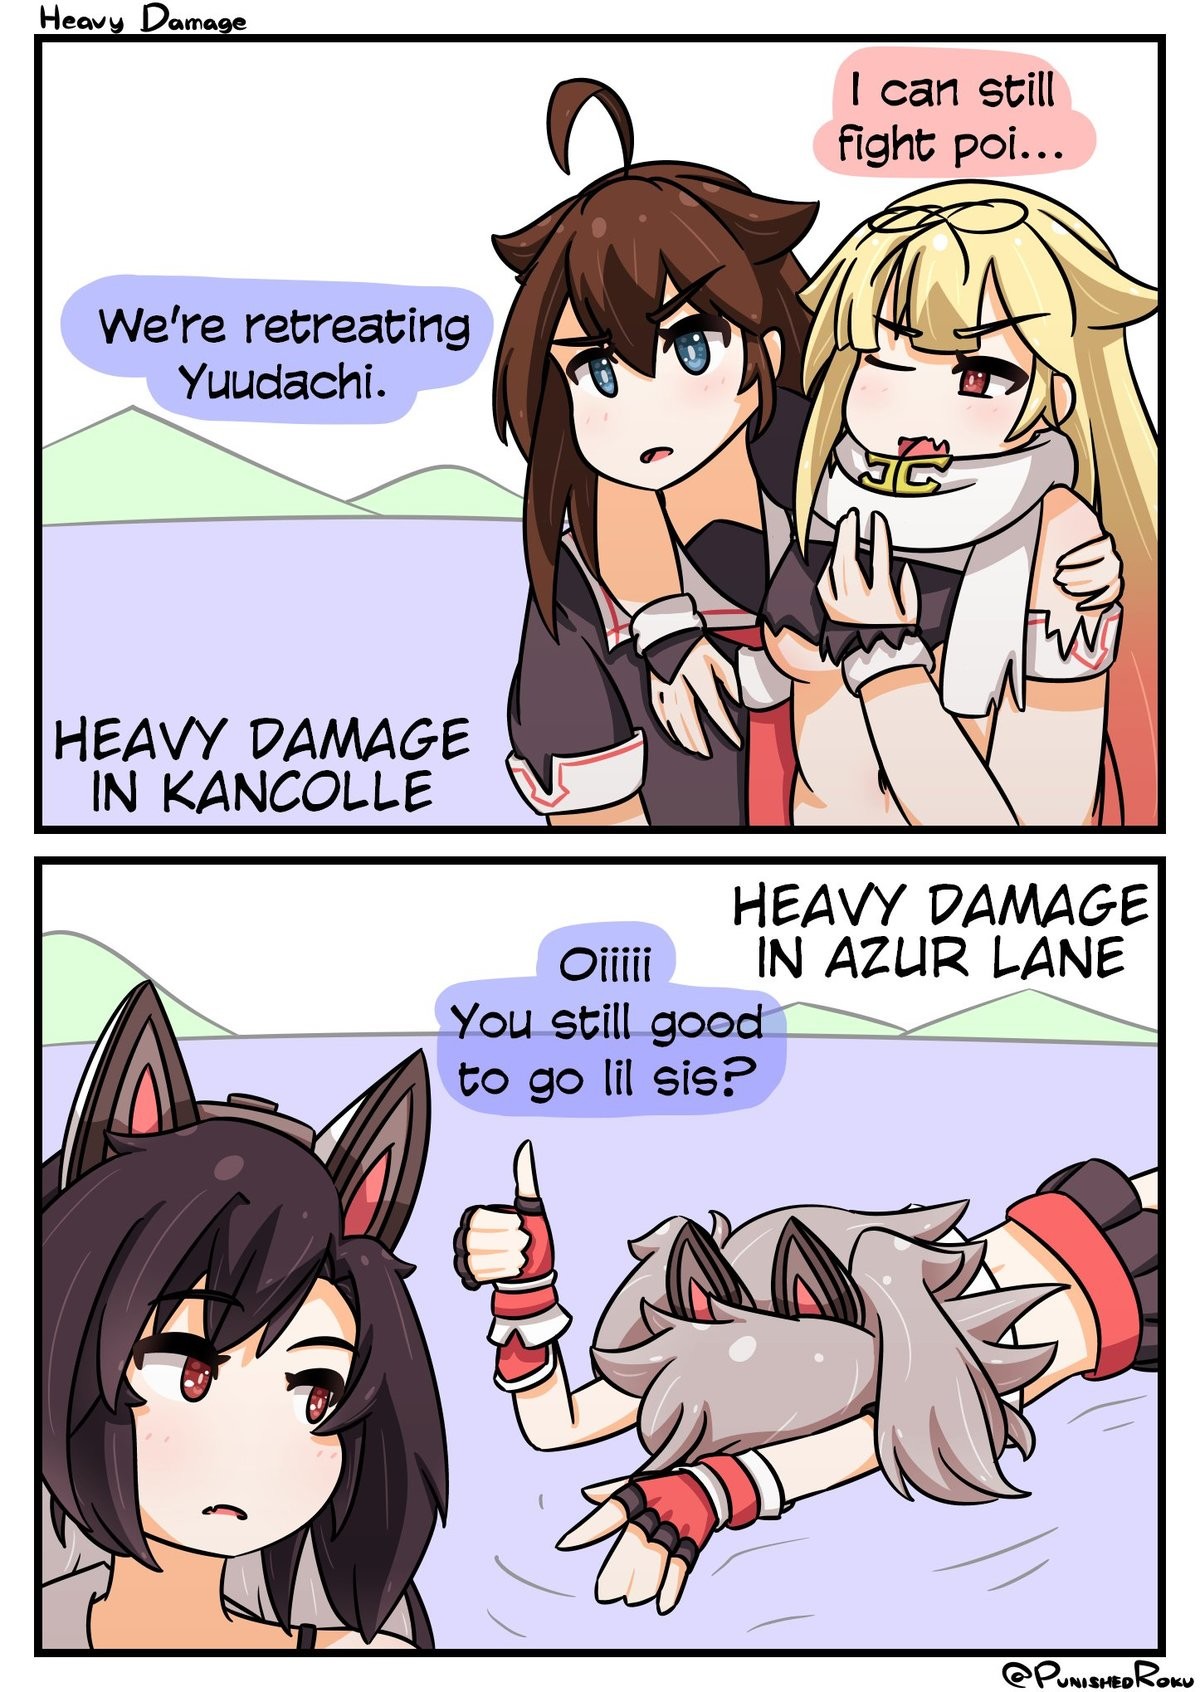 KanColle vs Azur Lane - Heavy Damage. Source join list: CuteBoatStuff (212 subs)Mention History join list:. If she can poi she can fight join list: KantaiCollectionMention History